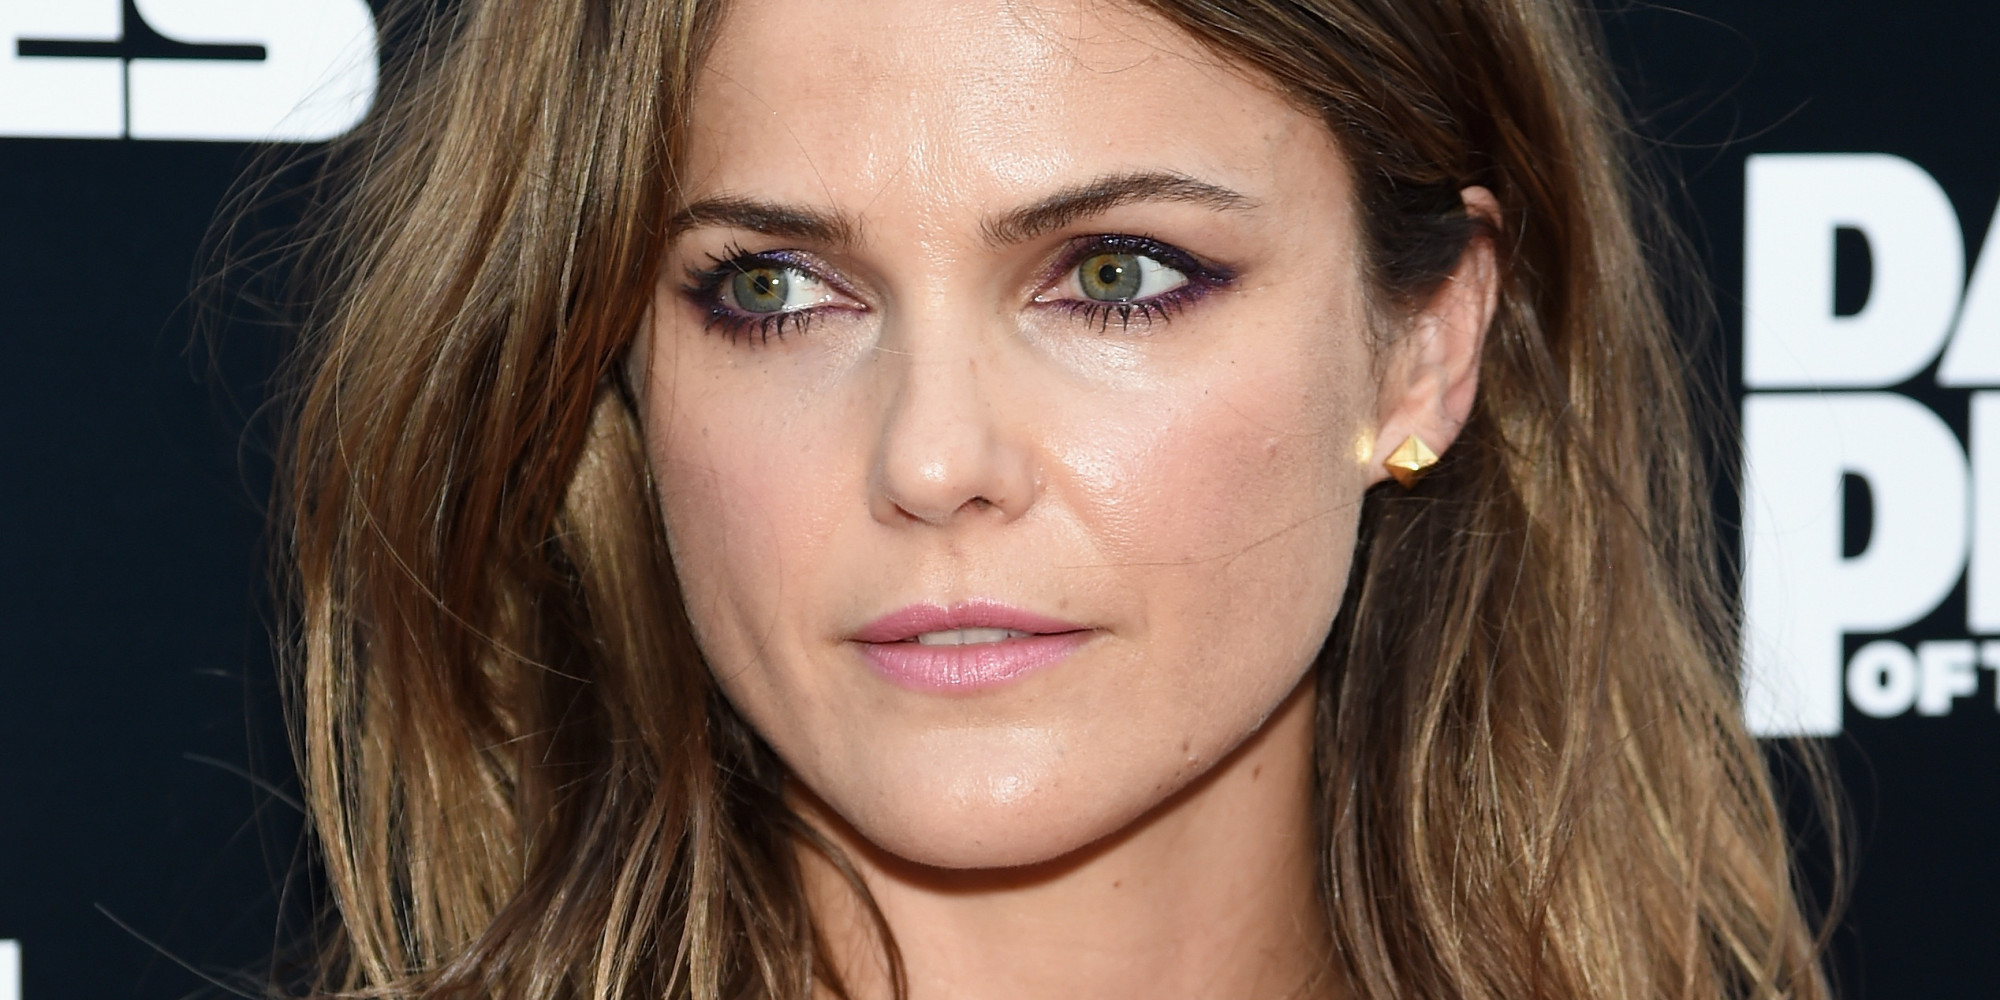 Keri Russell: Pictures, Videos, Breaking News